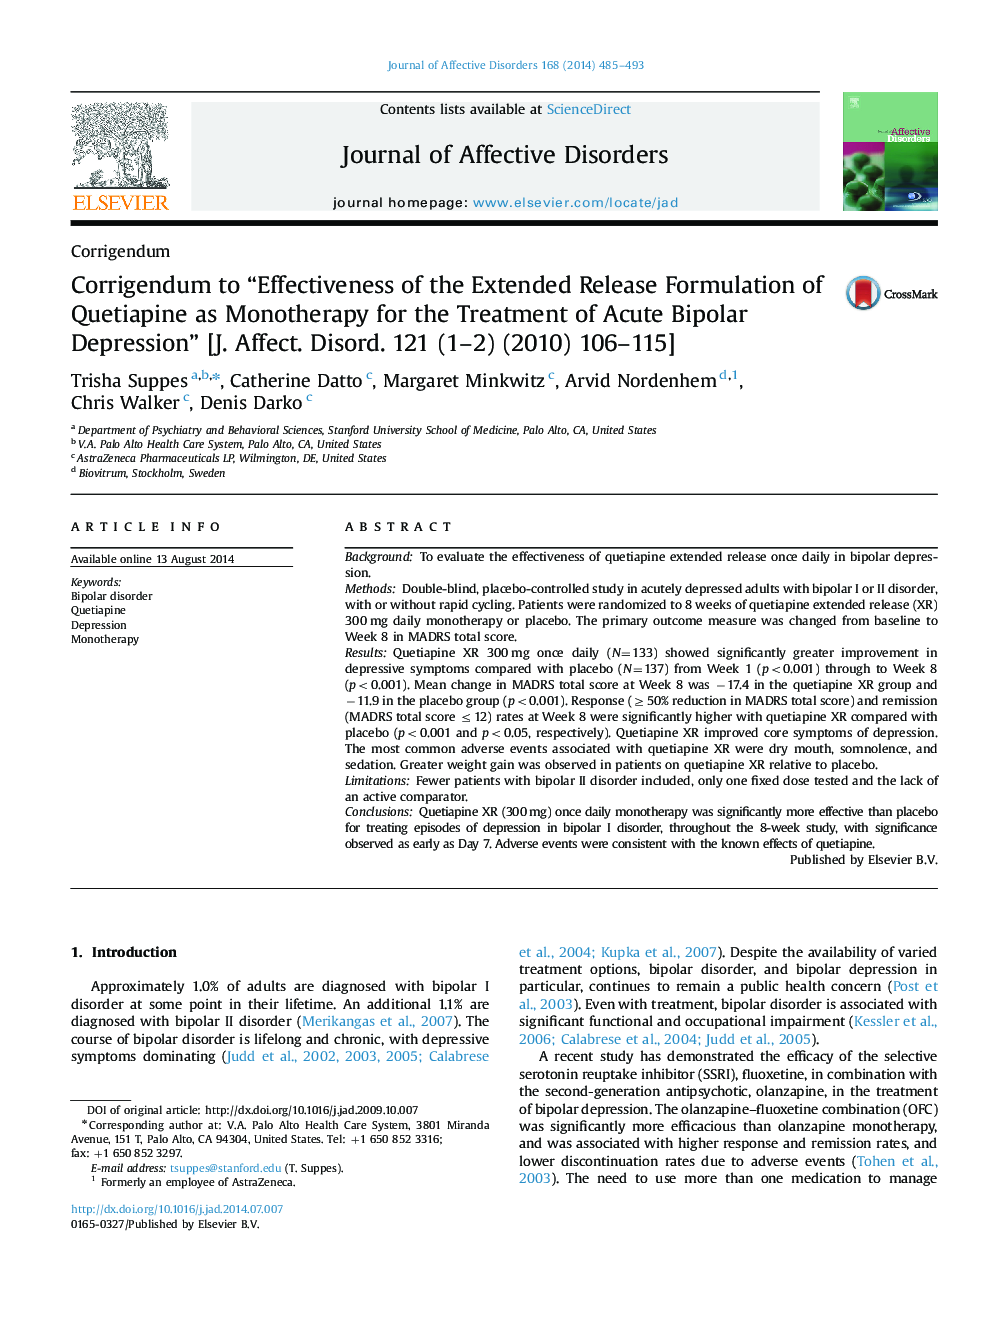 Corrigendum to “Effectiveness of the Extended Release Formulation of Quetiapine as Monotherapy for the Treatment of Acute Bipolar Depression” [J. Affect. Disord. 121 (1-2) (2010) 106-115]